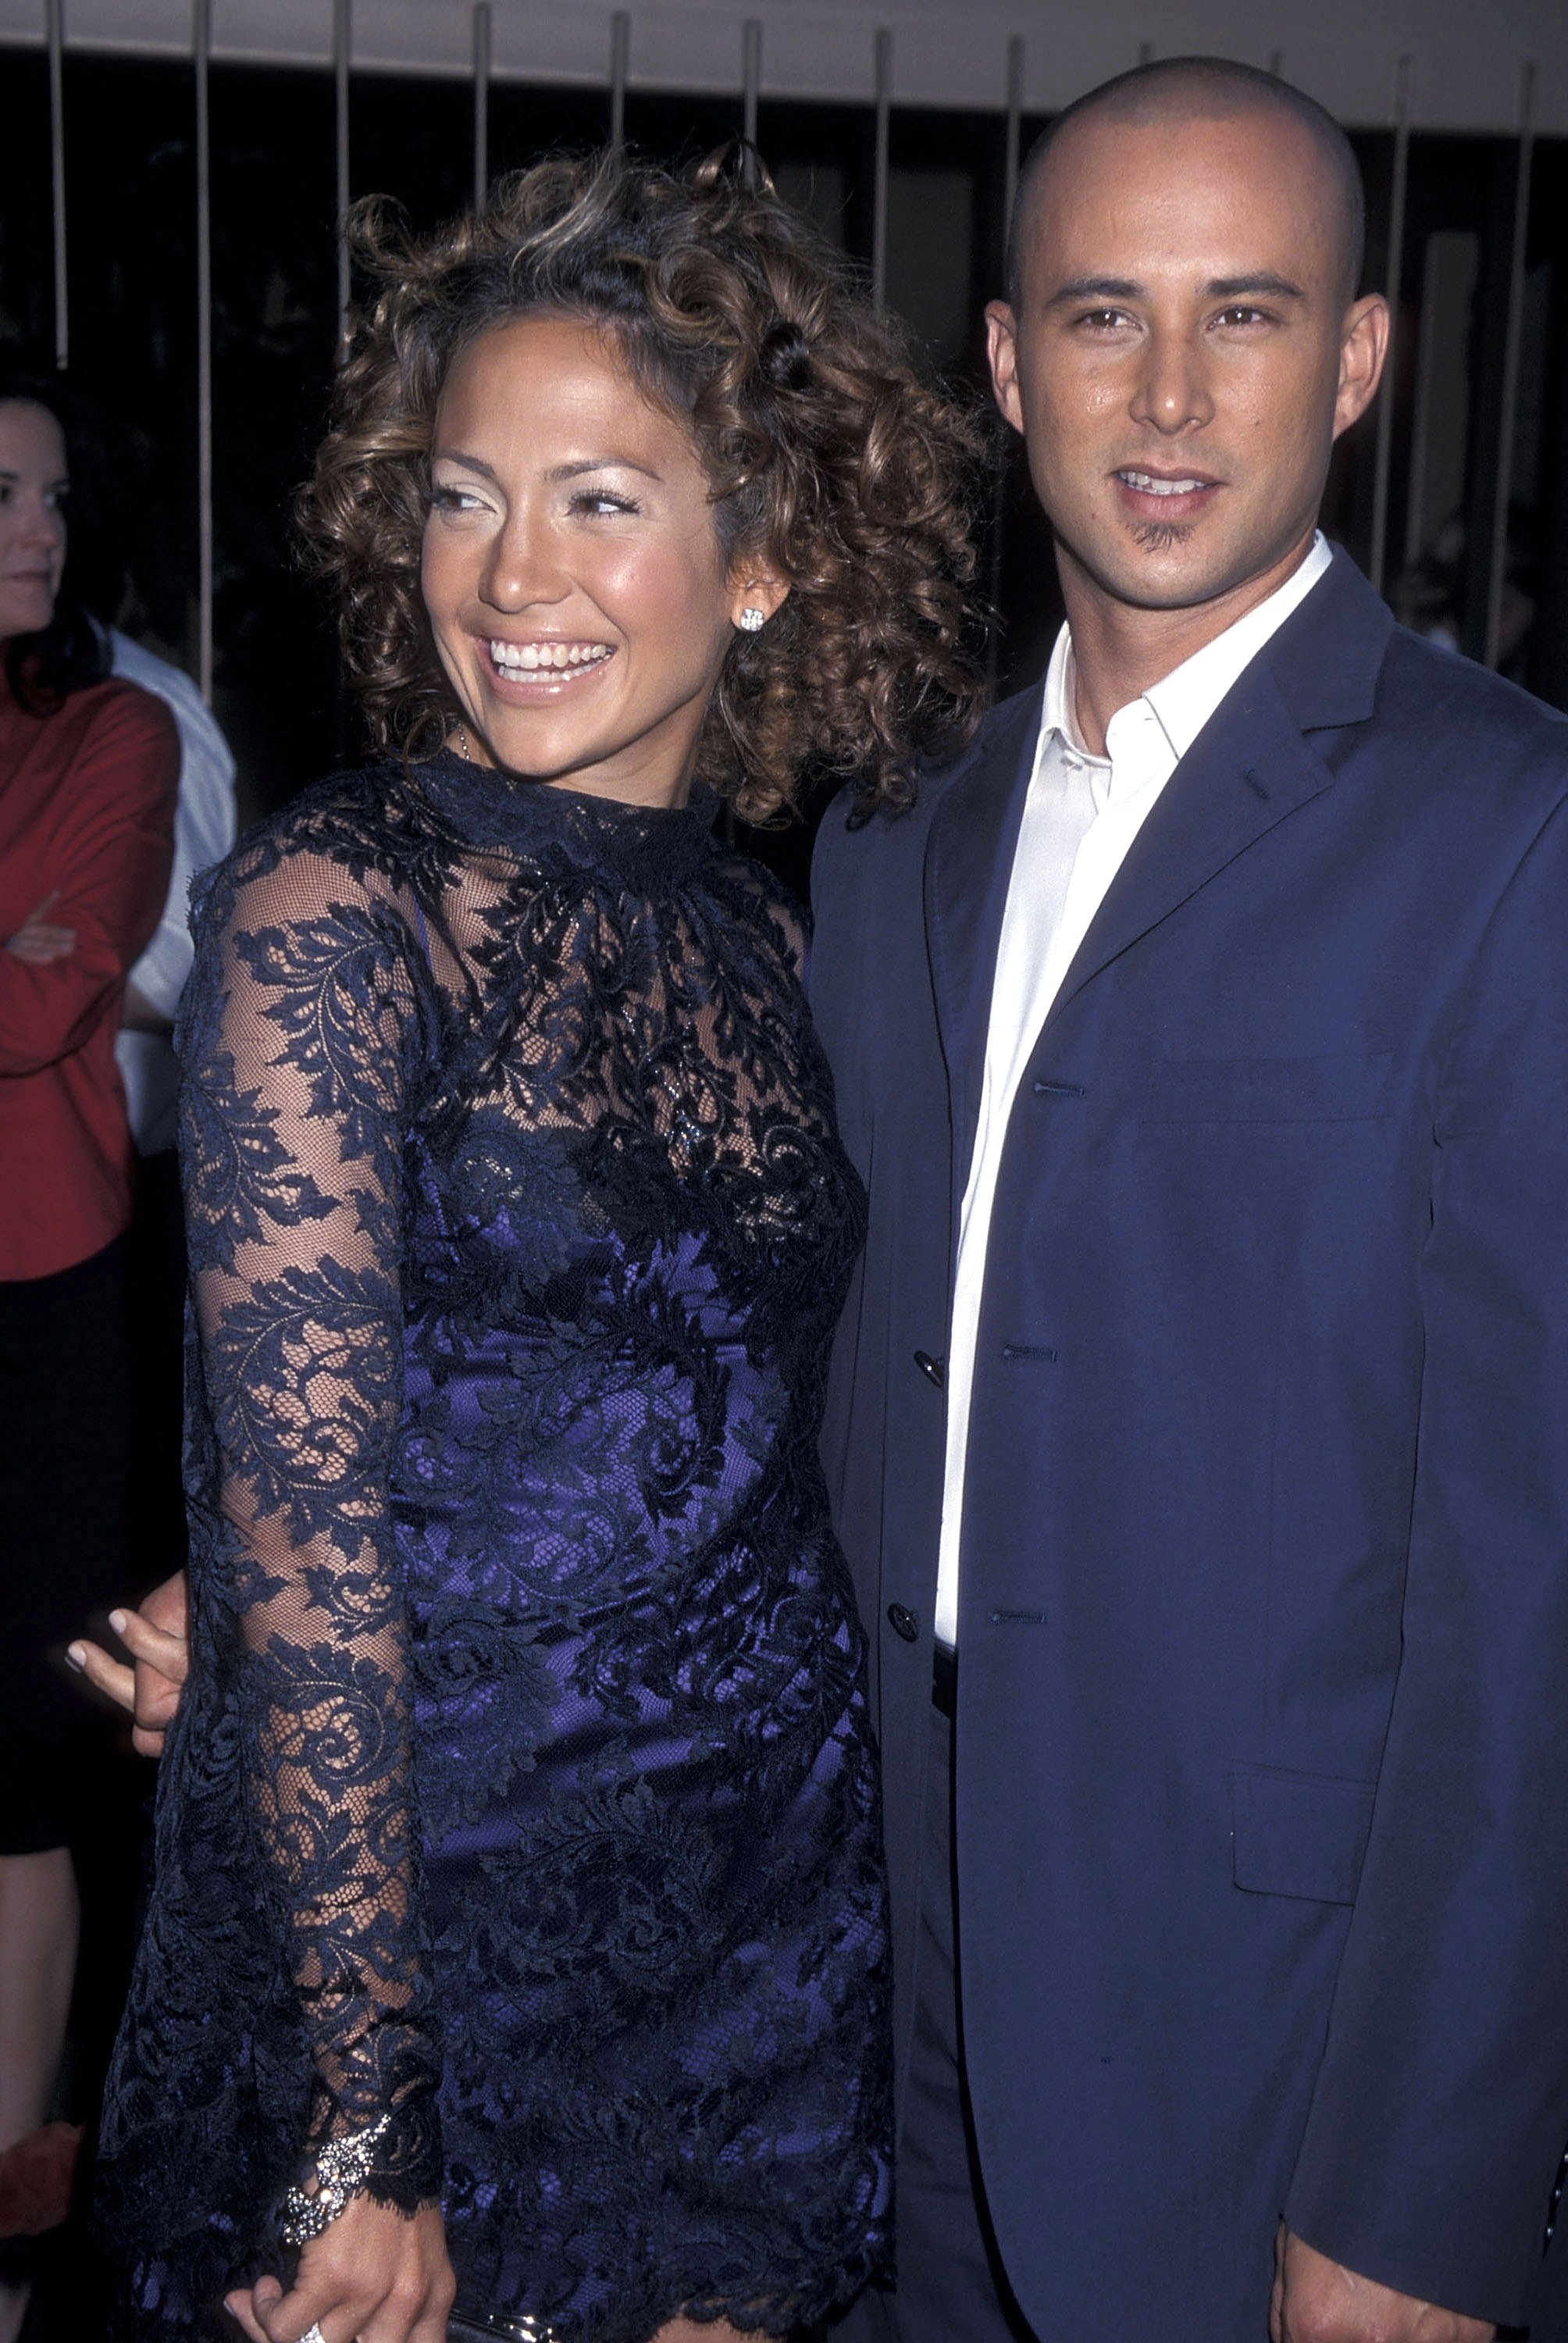 Jennifer Lopez and Cris Judd at the Hollywood premiere of "Angel Eyes" on May 15, 2001 | Source: Getty Images